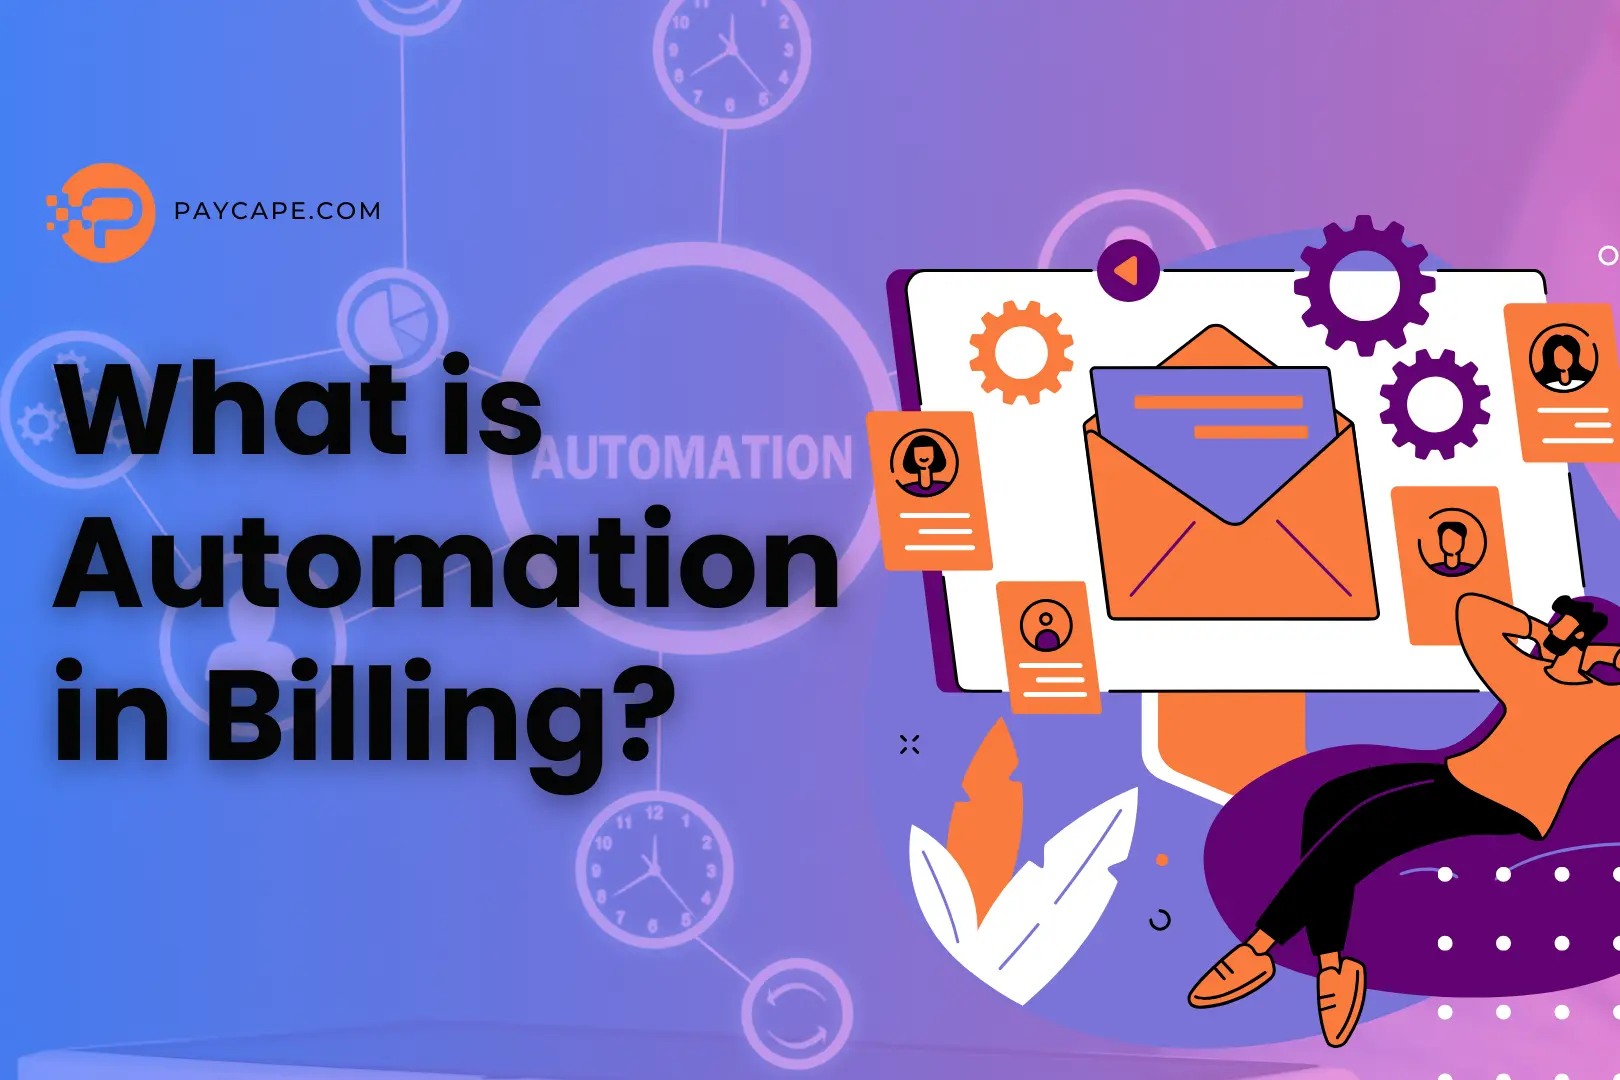 What is Automation in Billing